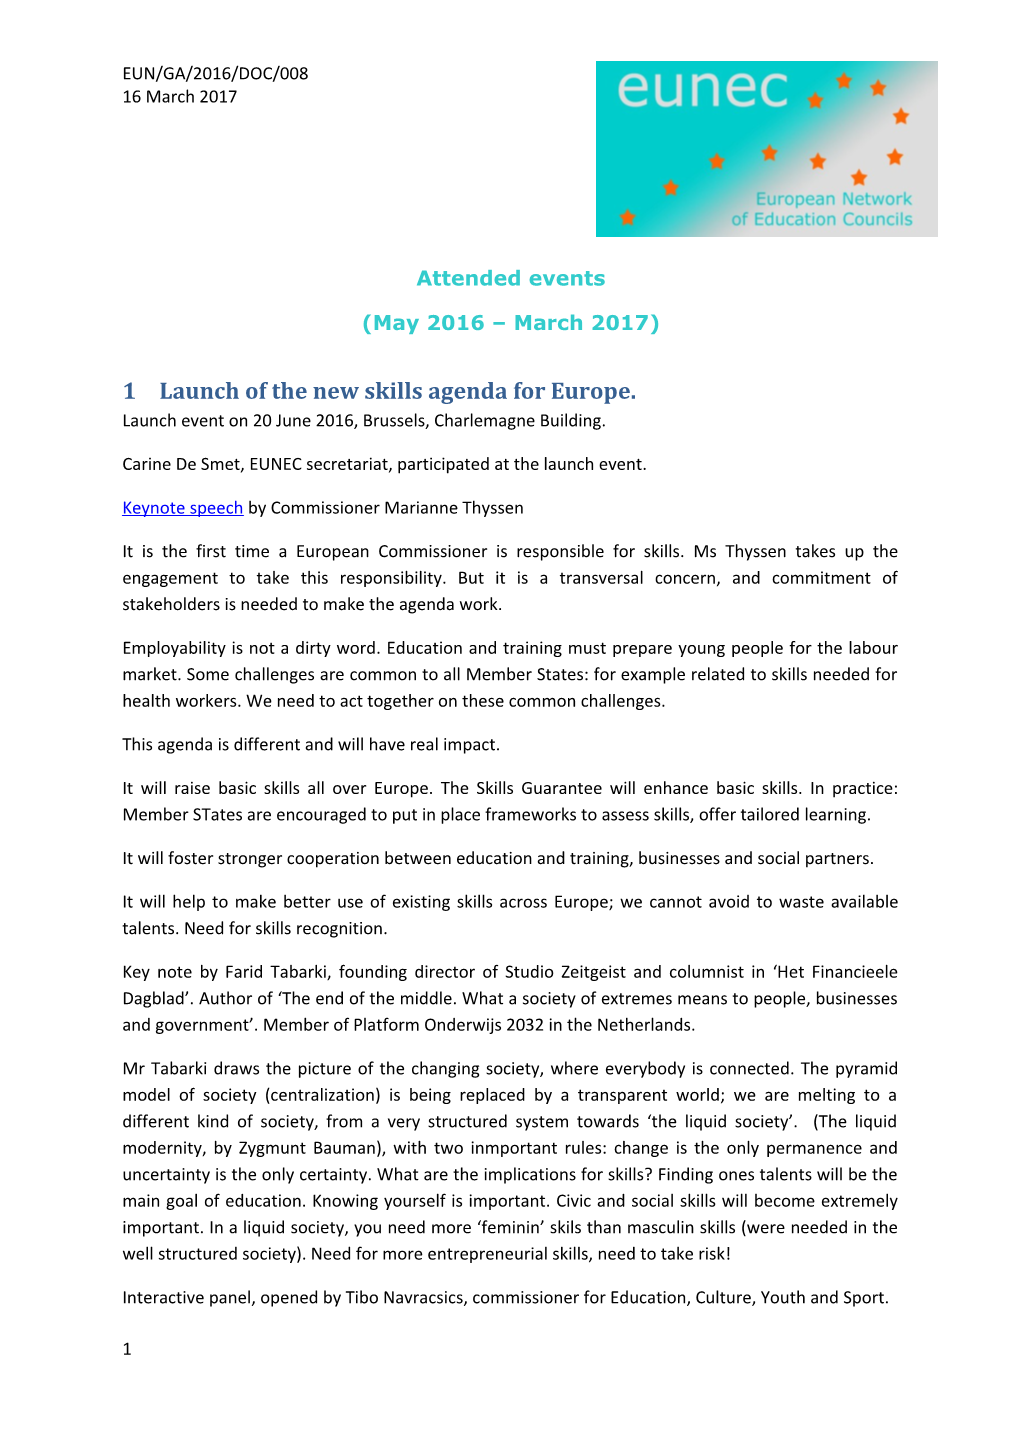 1 Launch of the New Skills Agenda for Europe